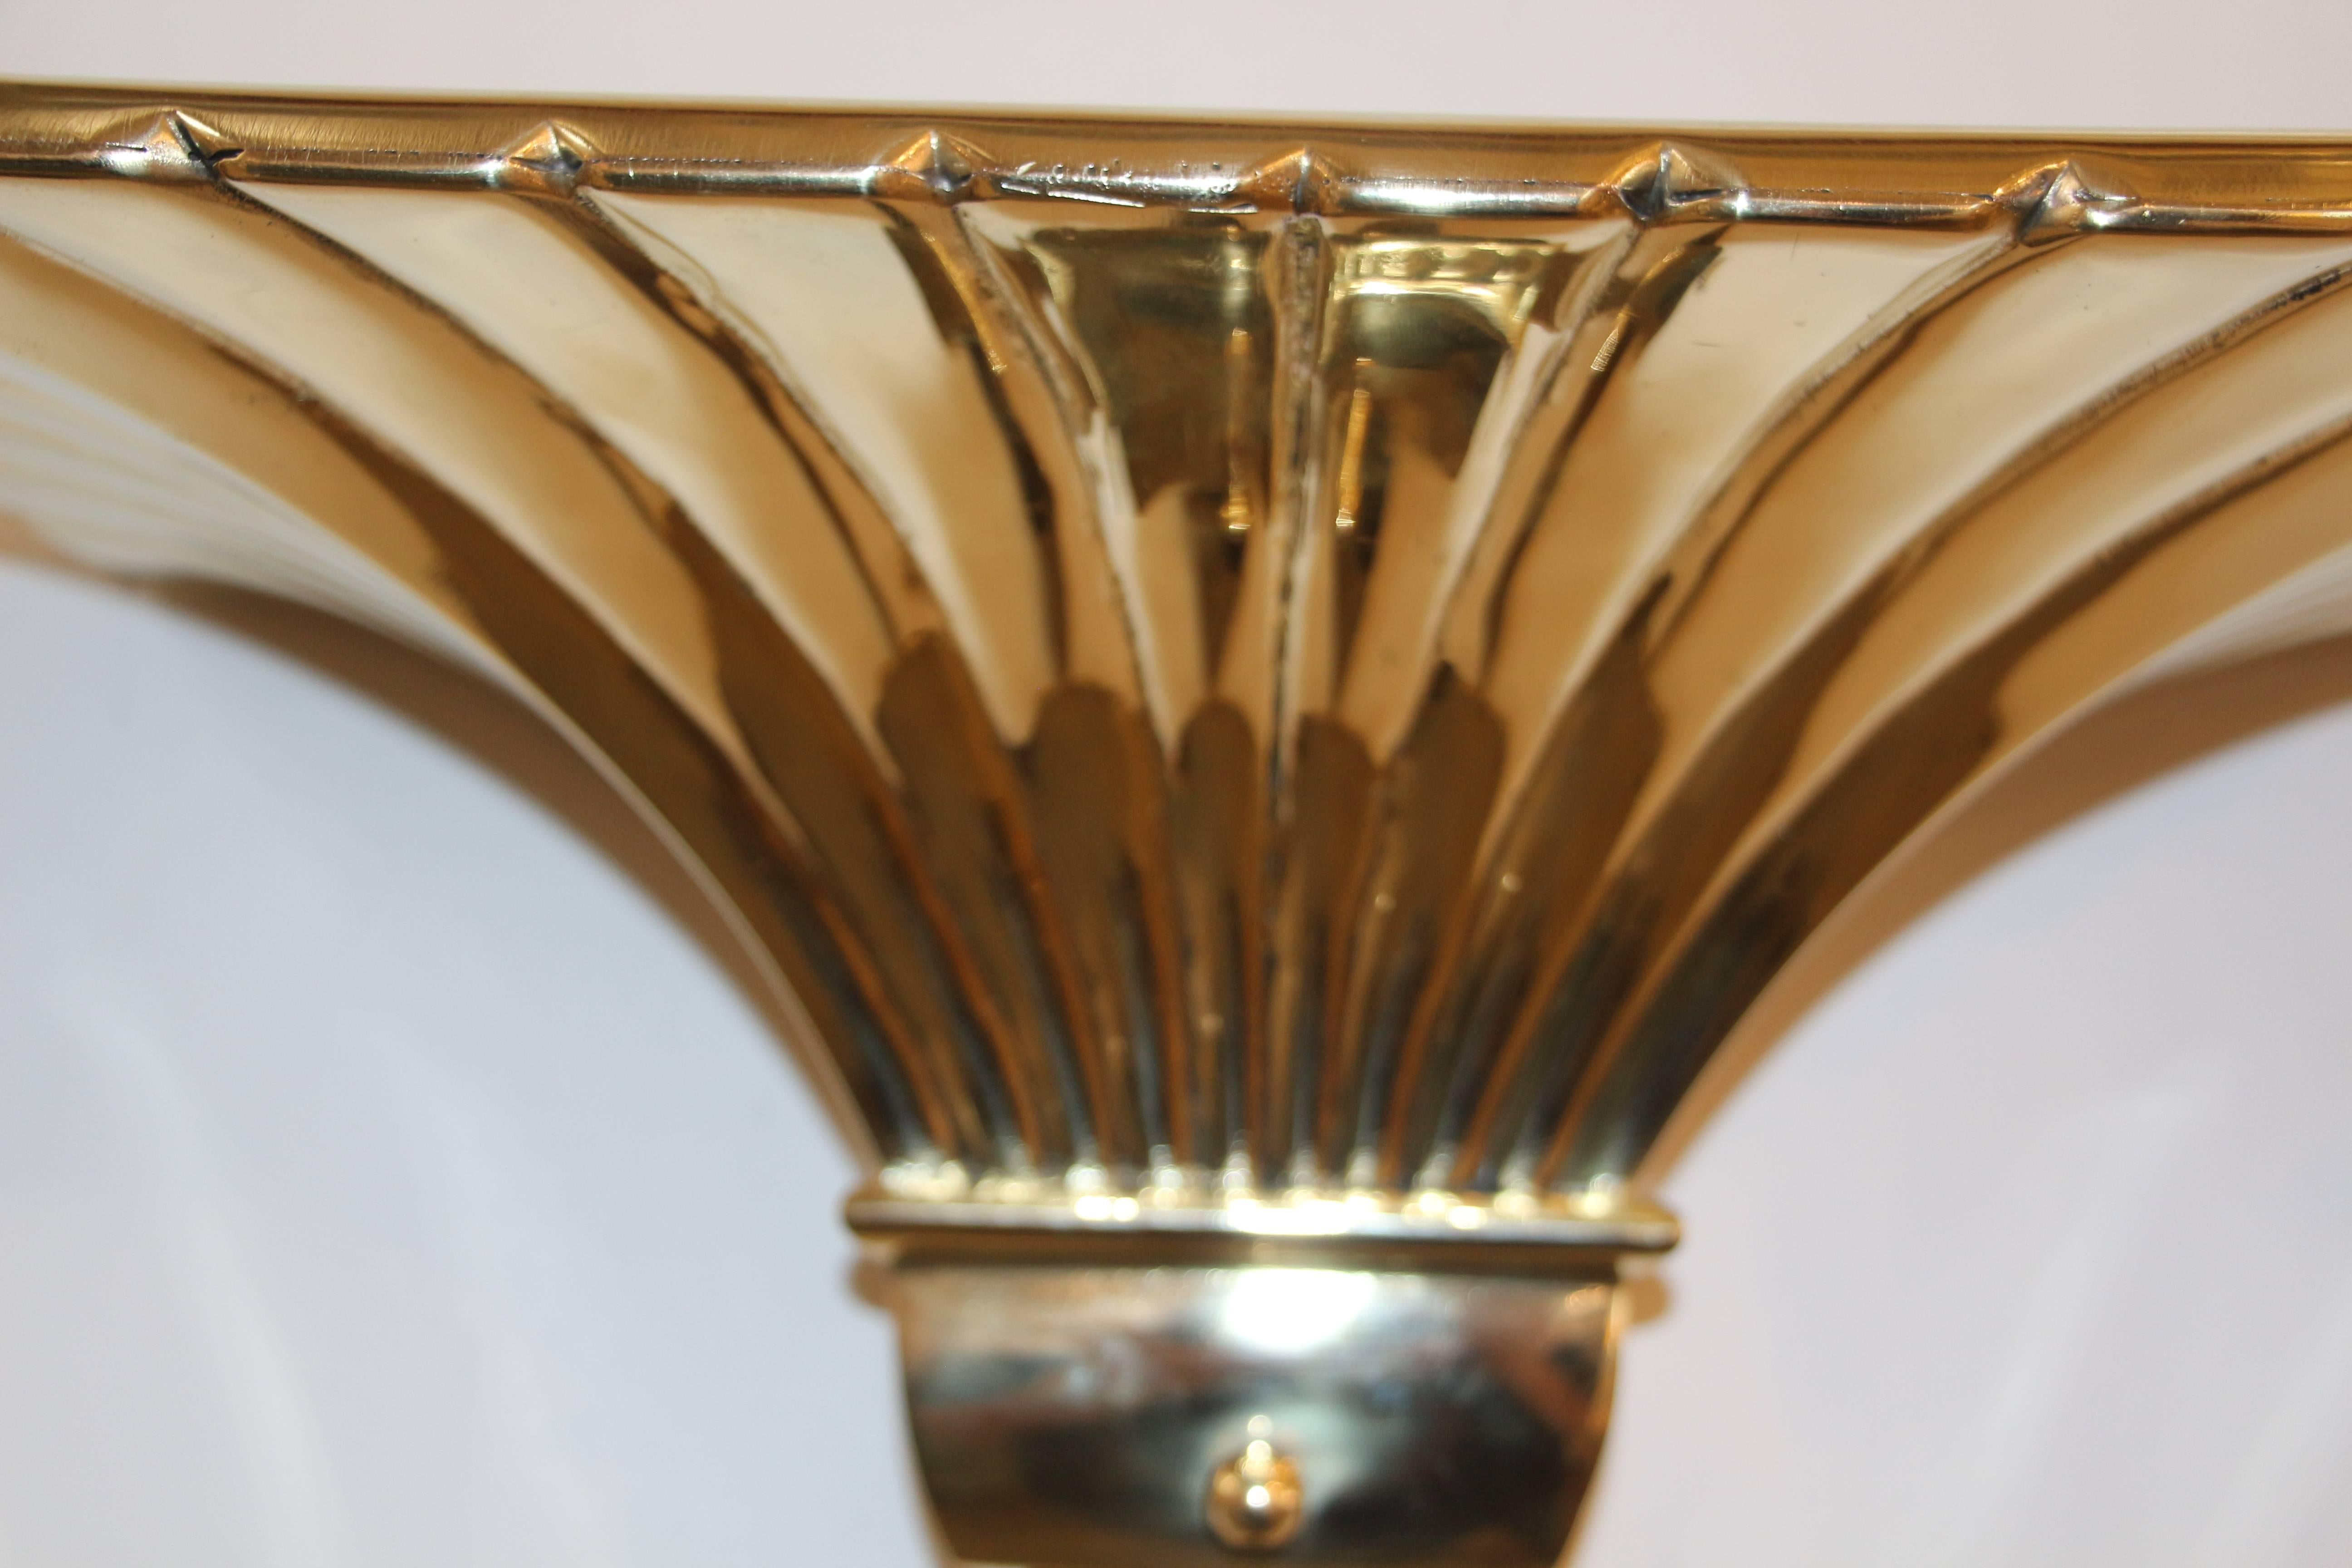 Late 20th Century 1979 Chapman Brass Sconces or Wall-Mounted Torchieres with Brass Wire Guards